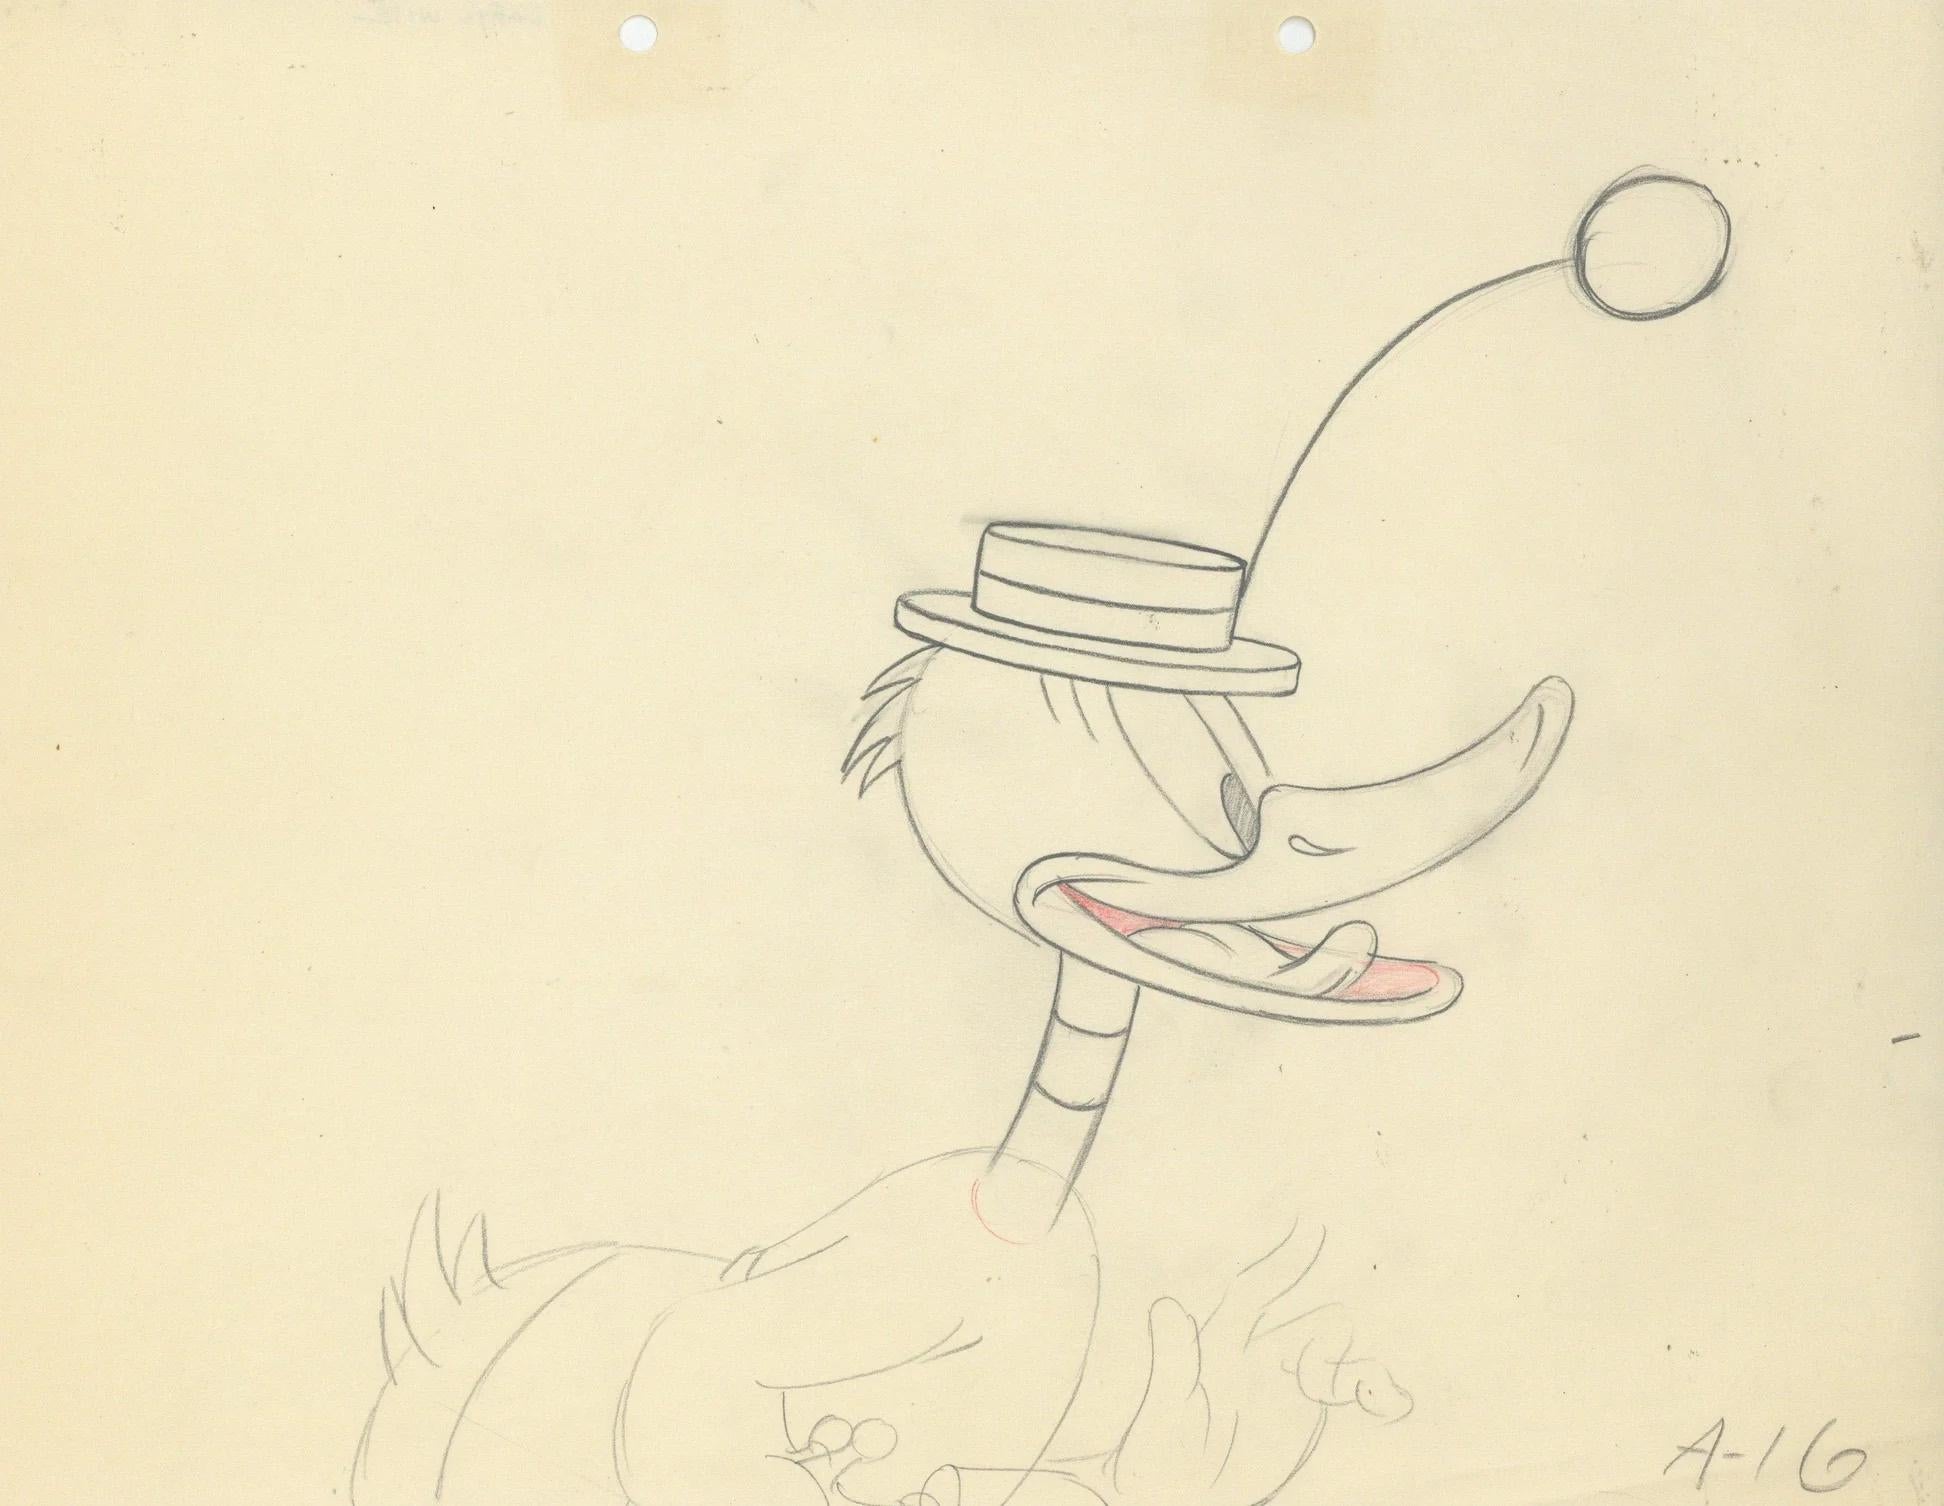 The Henpecked Duck Original Production Drawing: Mrs. Daffy Duck - Art by Chuck Jones